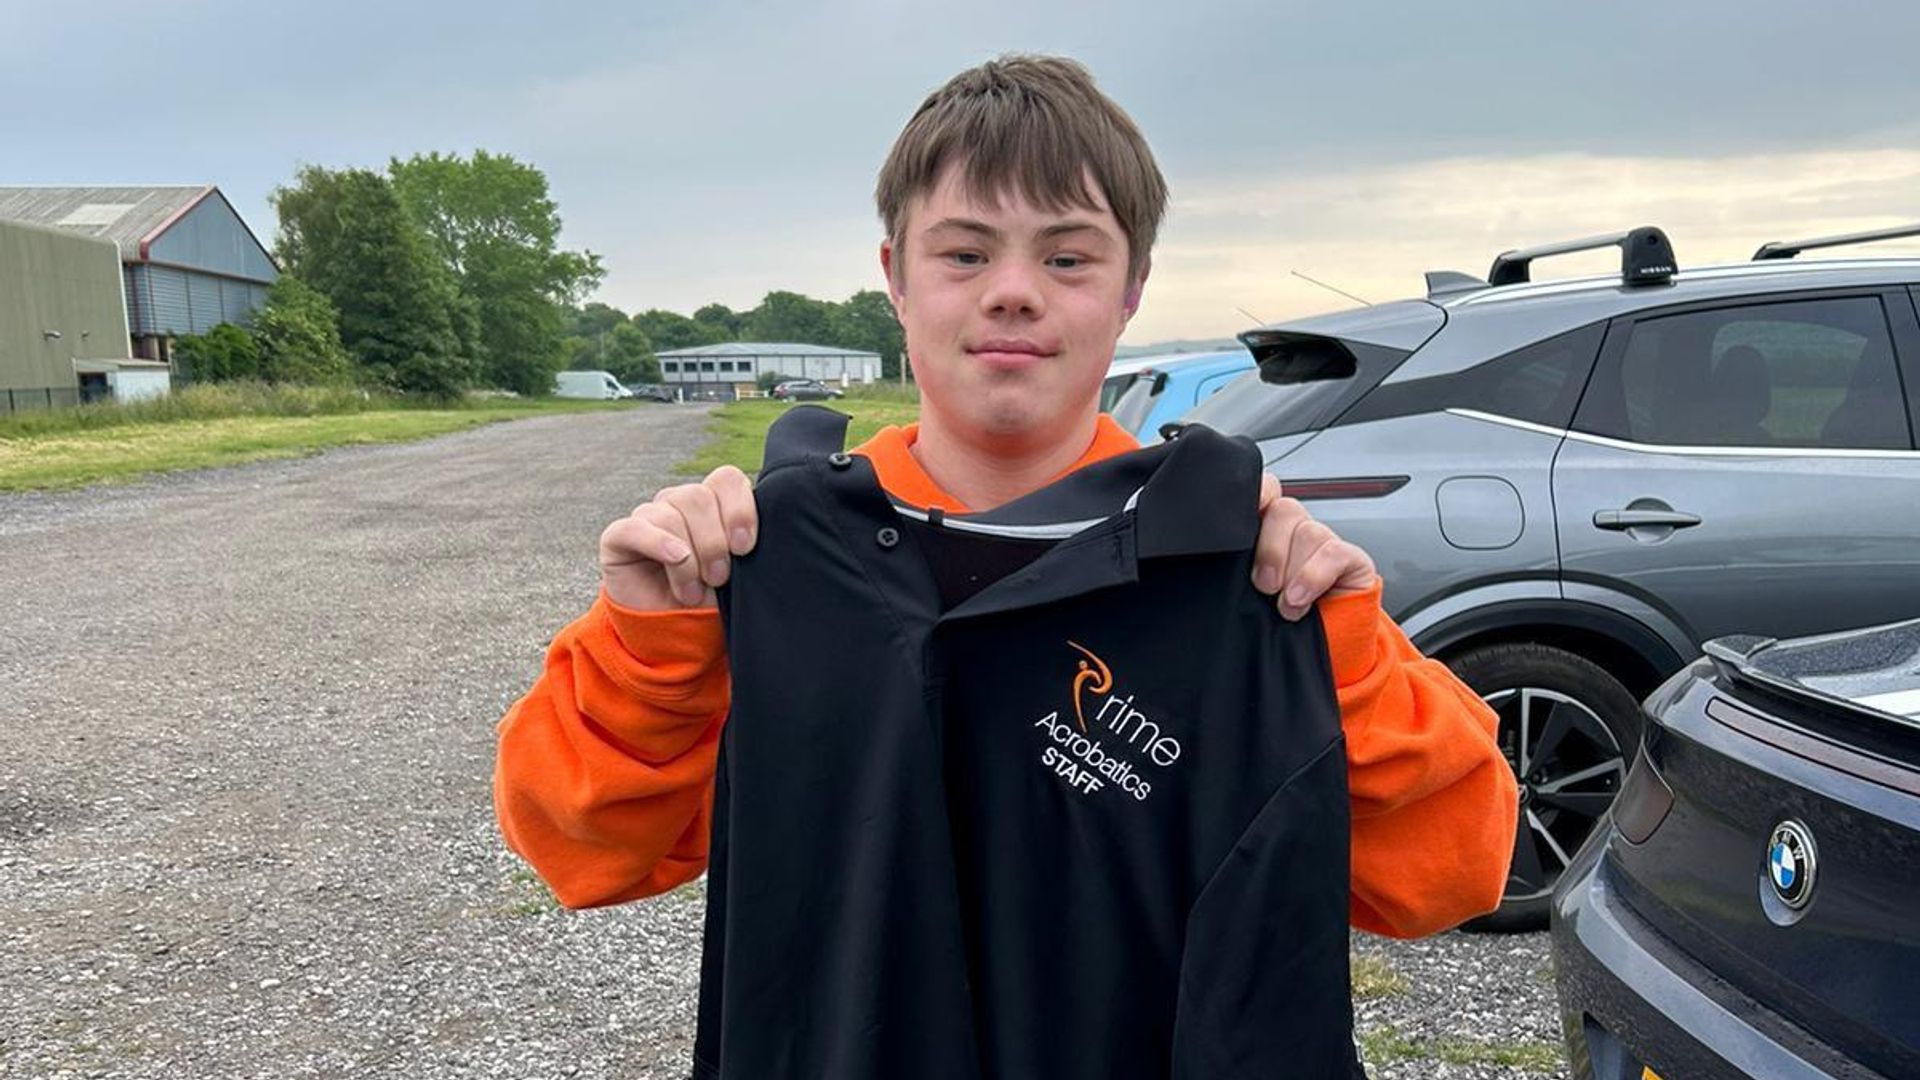 Teen who ran London Marathon told he can't skydive 'due to Down's syndrome'